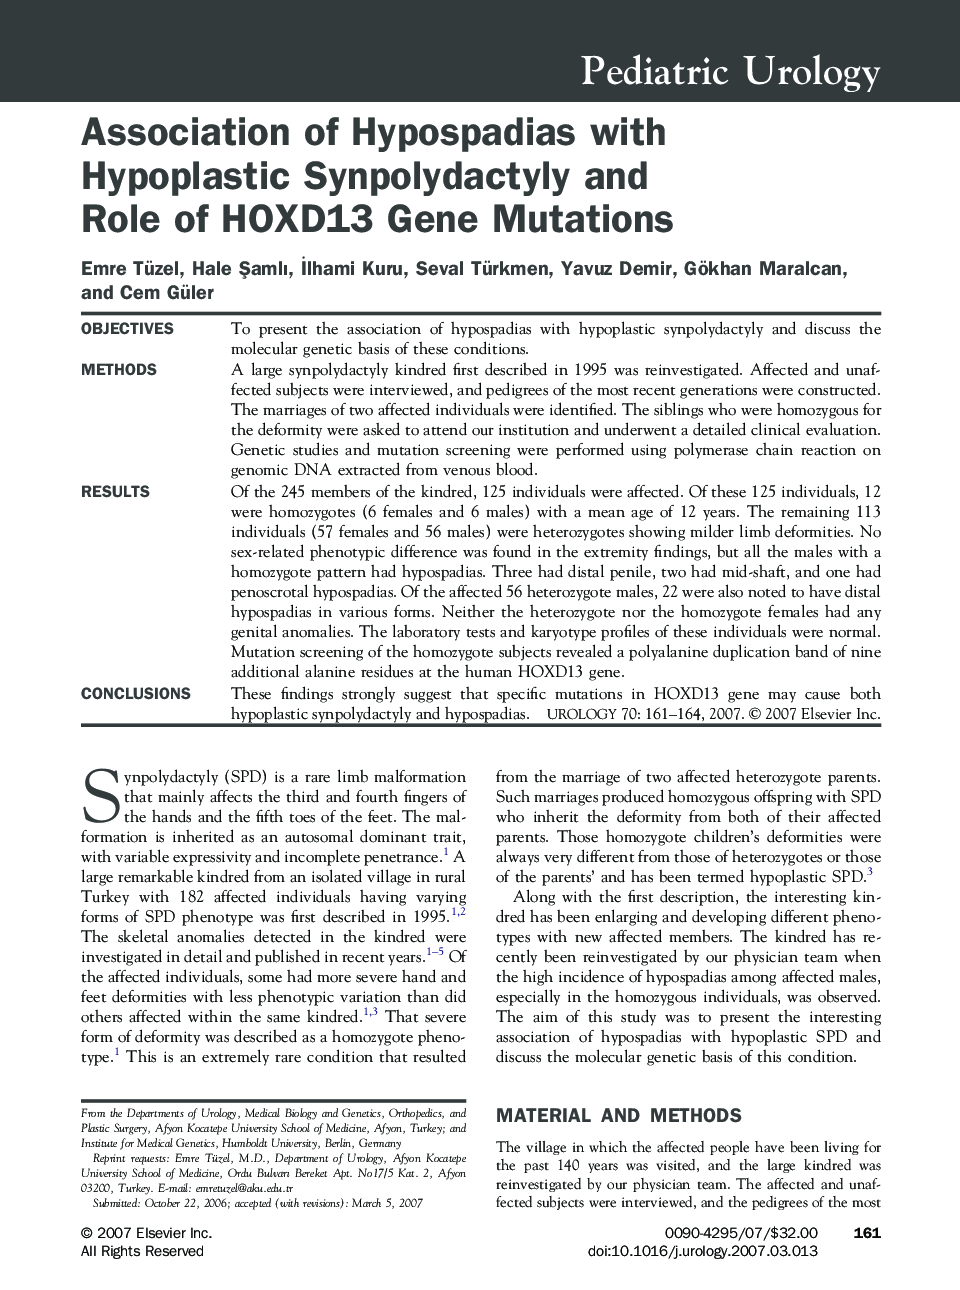 Association of Hypospadias with Hypoplastic Synpolydactyly and Role of HOXD13 Gene Mutations